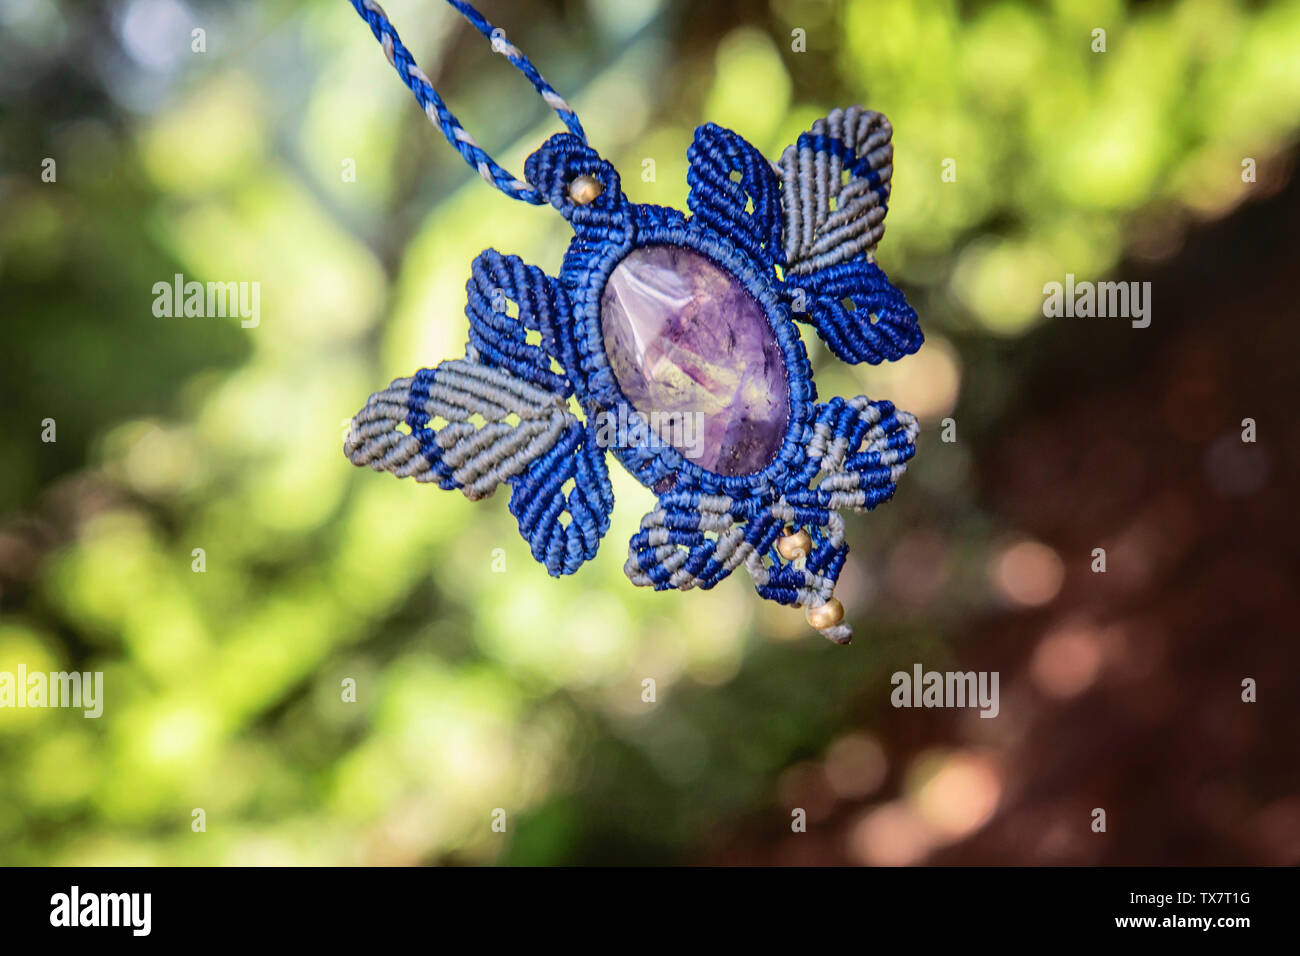 Macrame necklace with amethyst stone on natural background Stock Photo